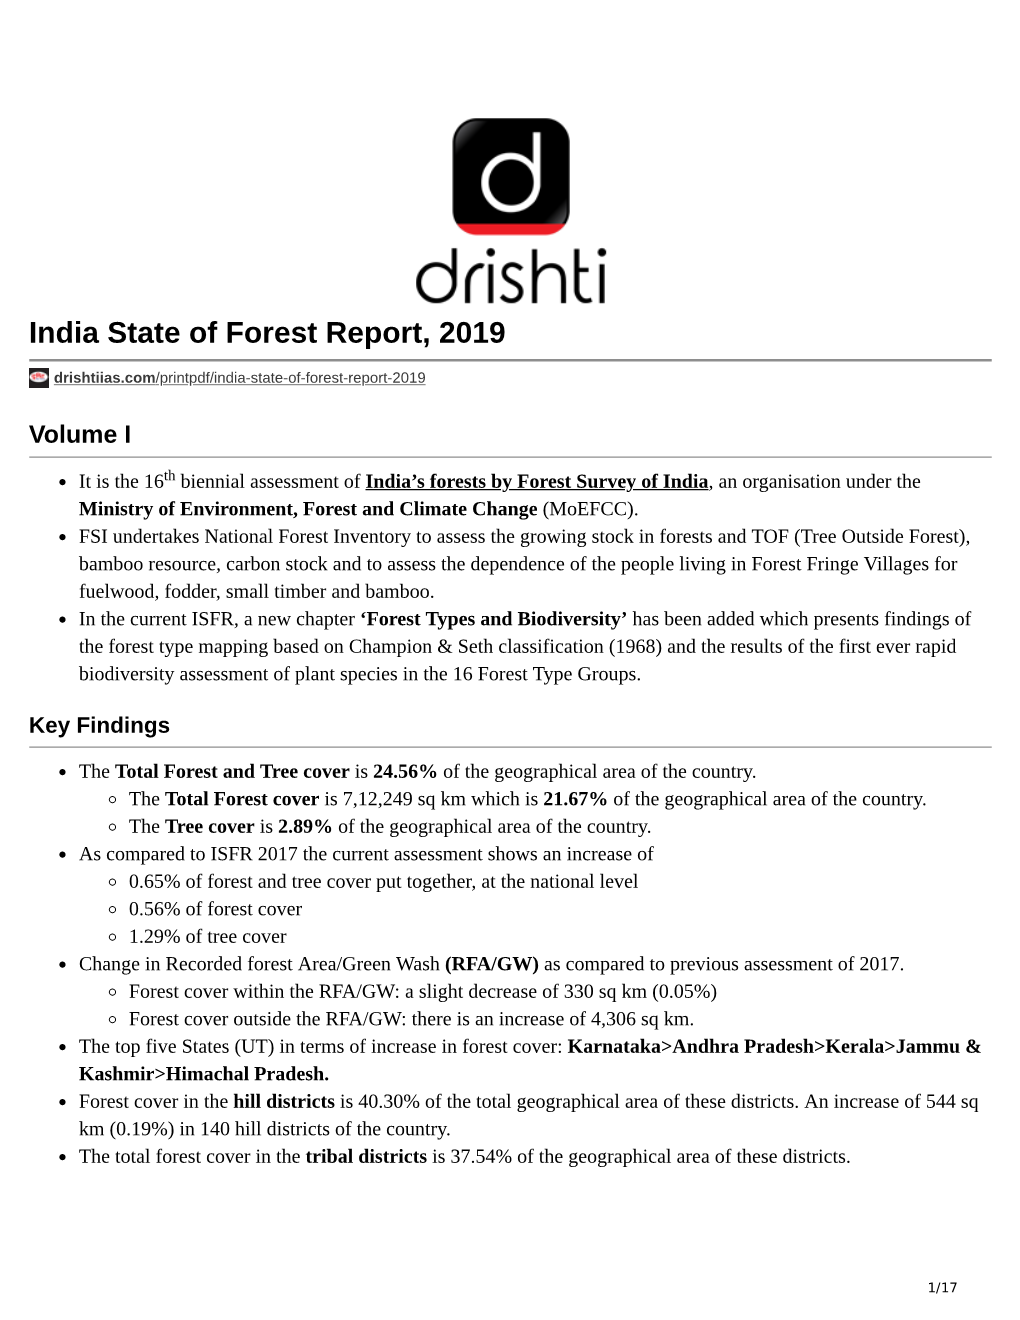 India State of Forest Report, 2019